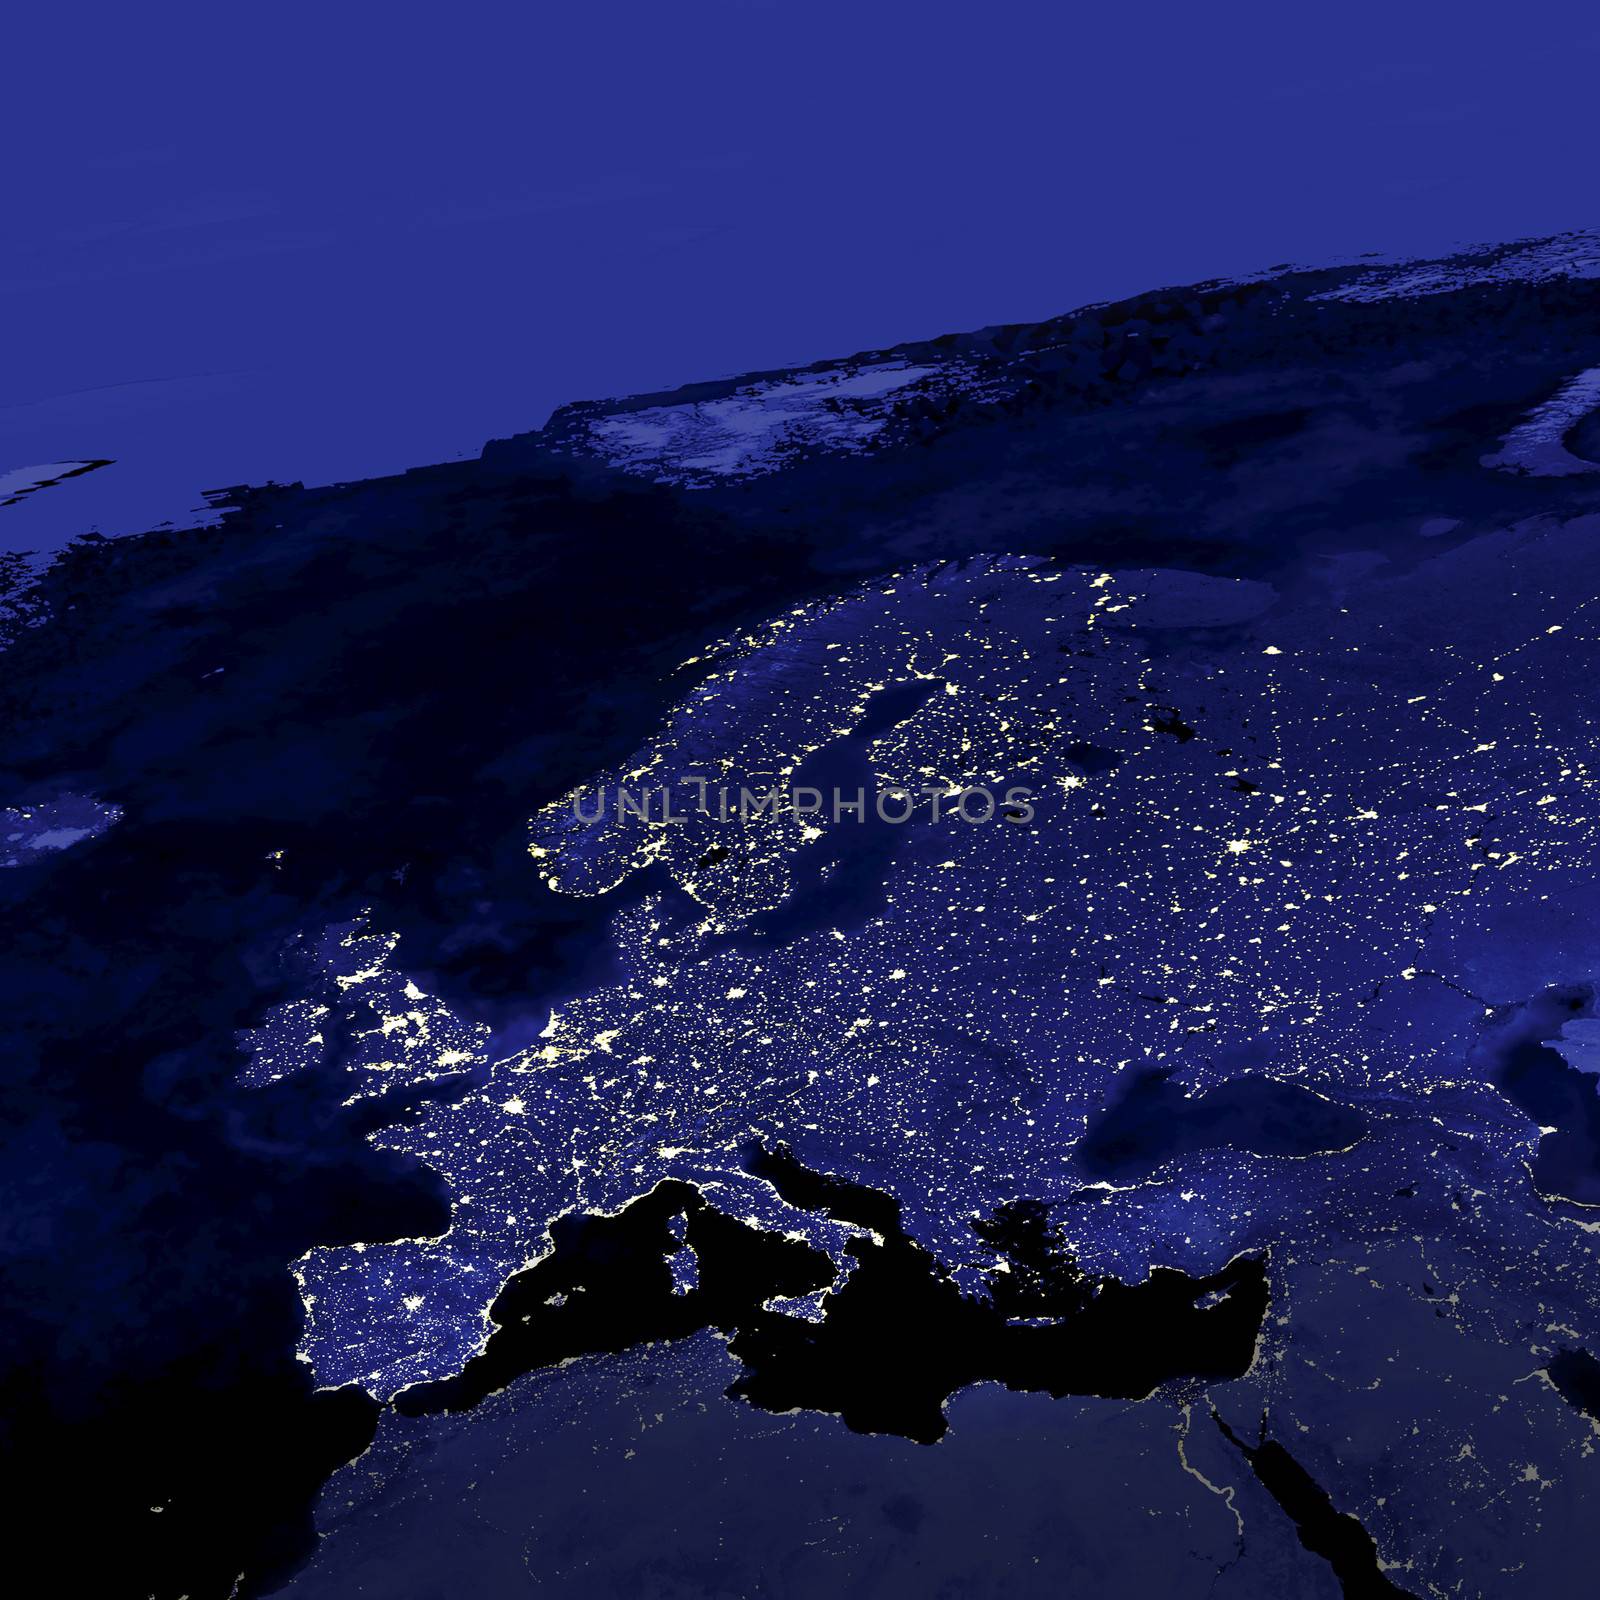 This image of Europe city lights was created with data from the Defense Meteorological Satellite Program (DMSP) Operational Linescan System (OLS). Originally designed to view clouds by moonlight, the OLS is also used to map the locations of permanent lights on the Earth's surface.

The brightest areas of the Earth are the most urbanized, but not necessarily the most populated. (Compare western Europe with China and India.) 
Cities tend to grow along coastlines and transportation networks. 
Even without the underlying map, the outlines of many continents would still be visible. 
In Russia, the Trans-Siberian railroad is a thin line stretching from Moscow through the center of Asia to Vladivostok. 

Even more than 100 years after the invention of the electric light, some regions remain thinly populated and unlit. 

The Earth Observatory describe how N.A.S.A. scientists use city light data to map urbanization.

N.A.S.A. Public Image Edited.